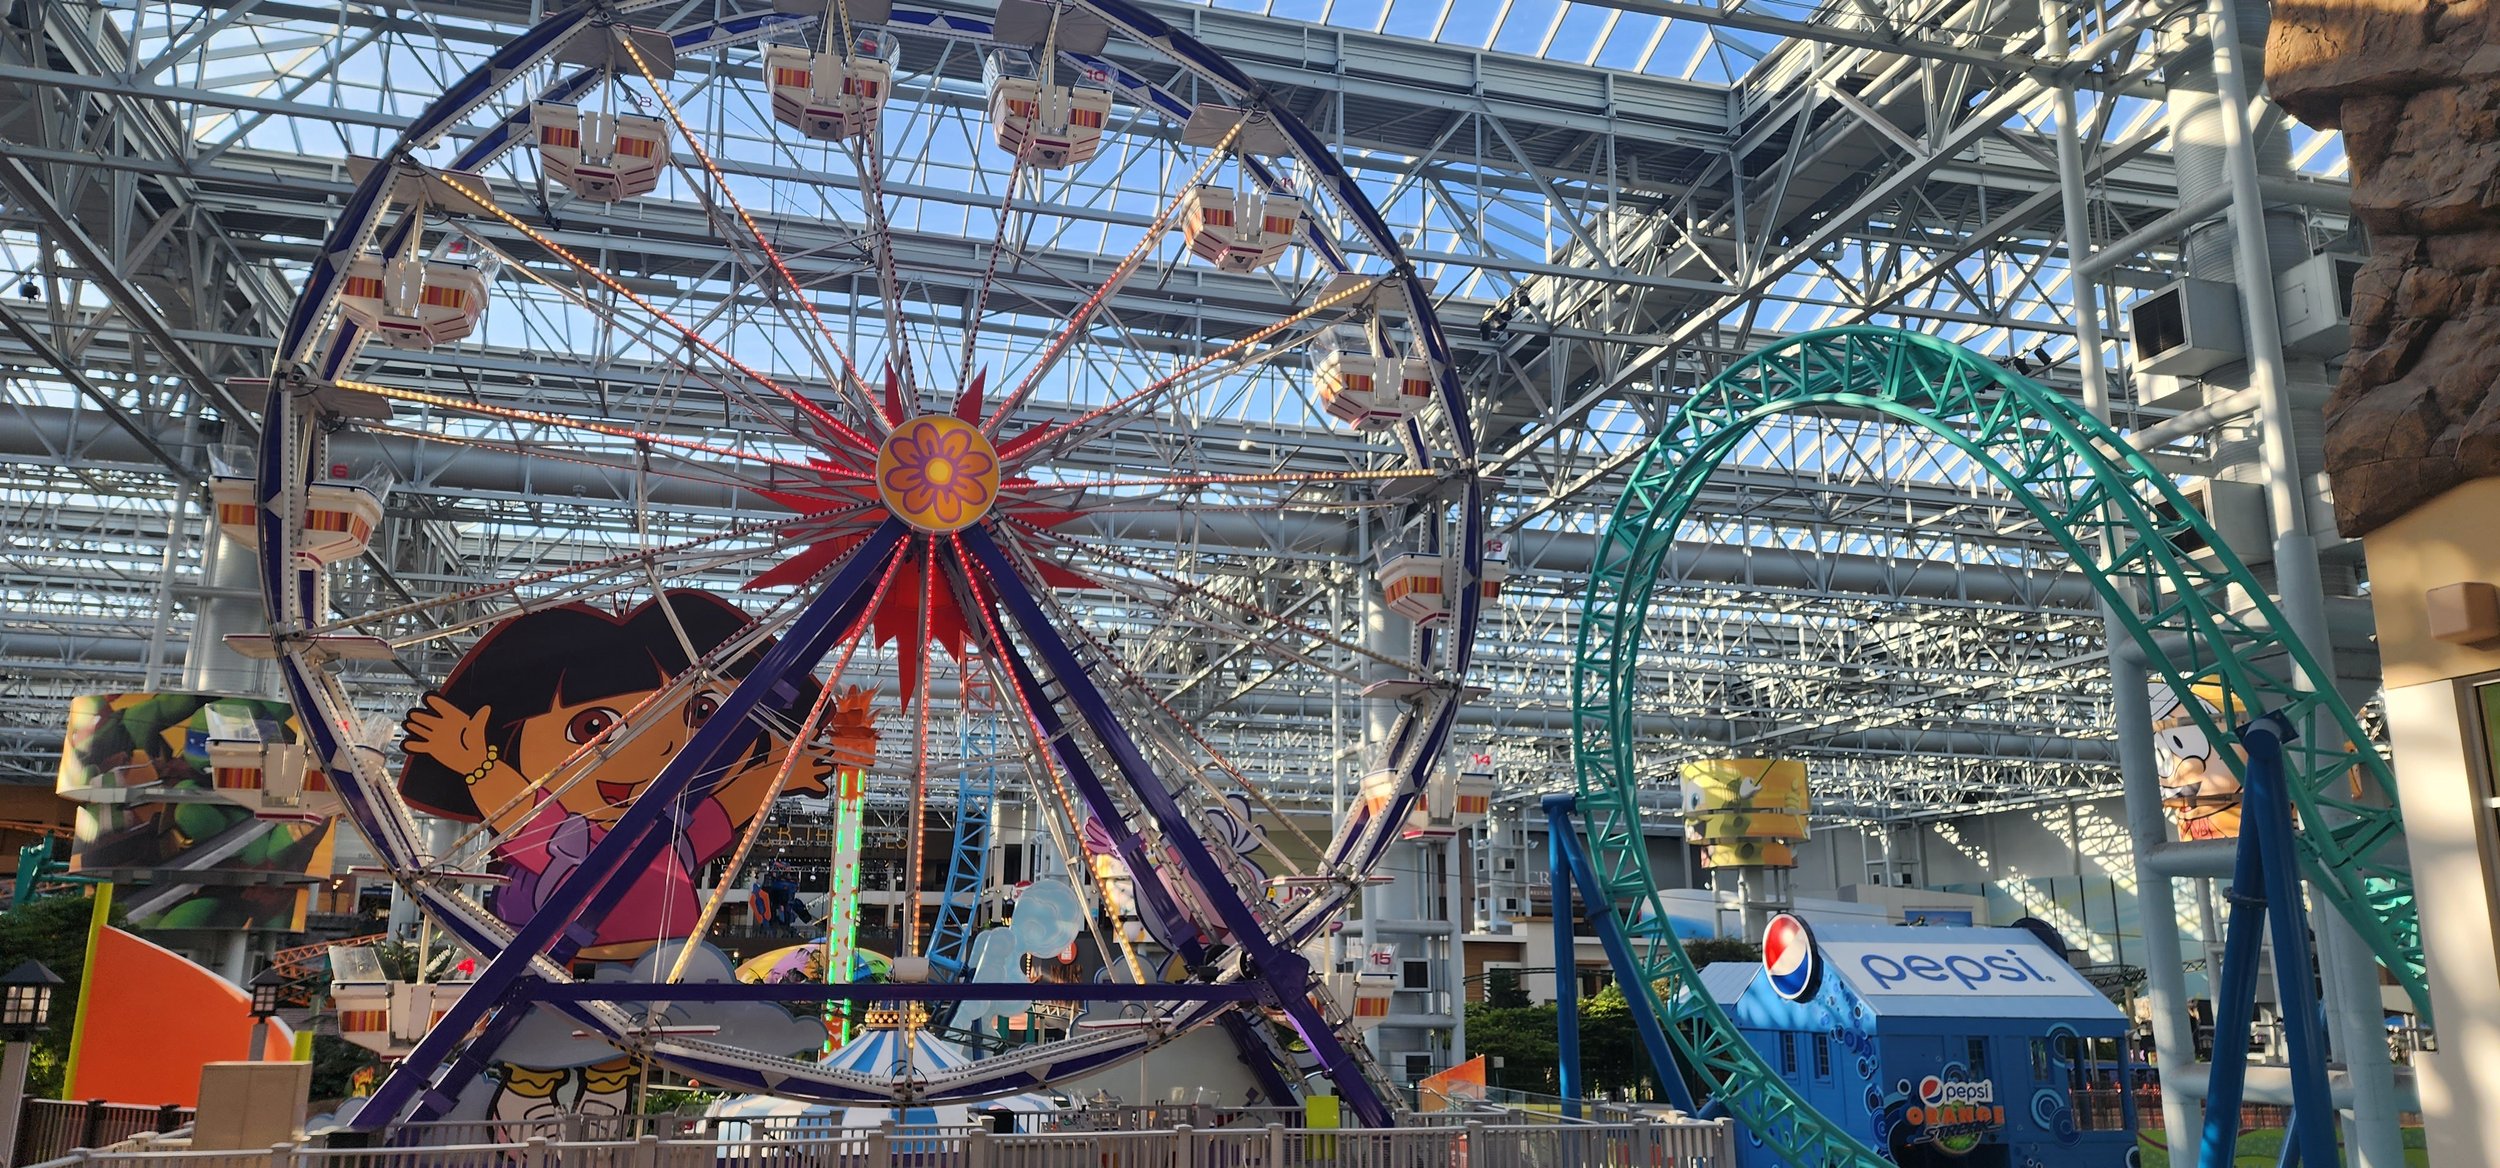 The Complete Guide to Mall of America - Racked